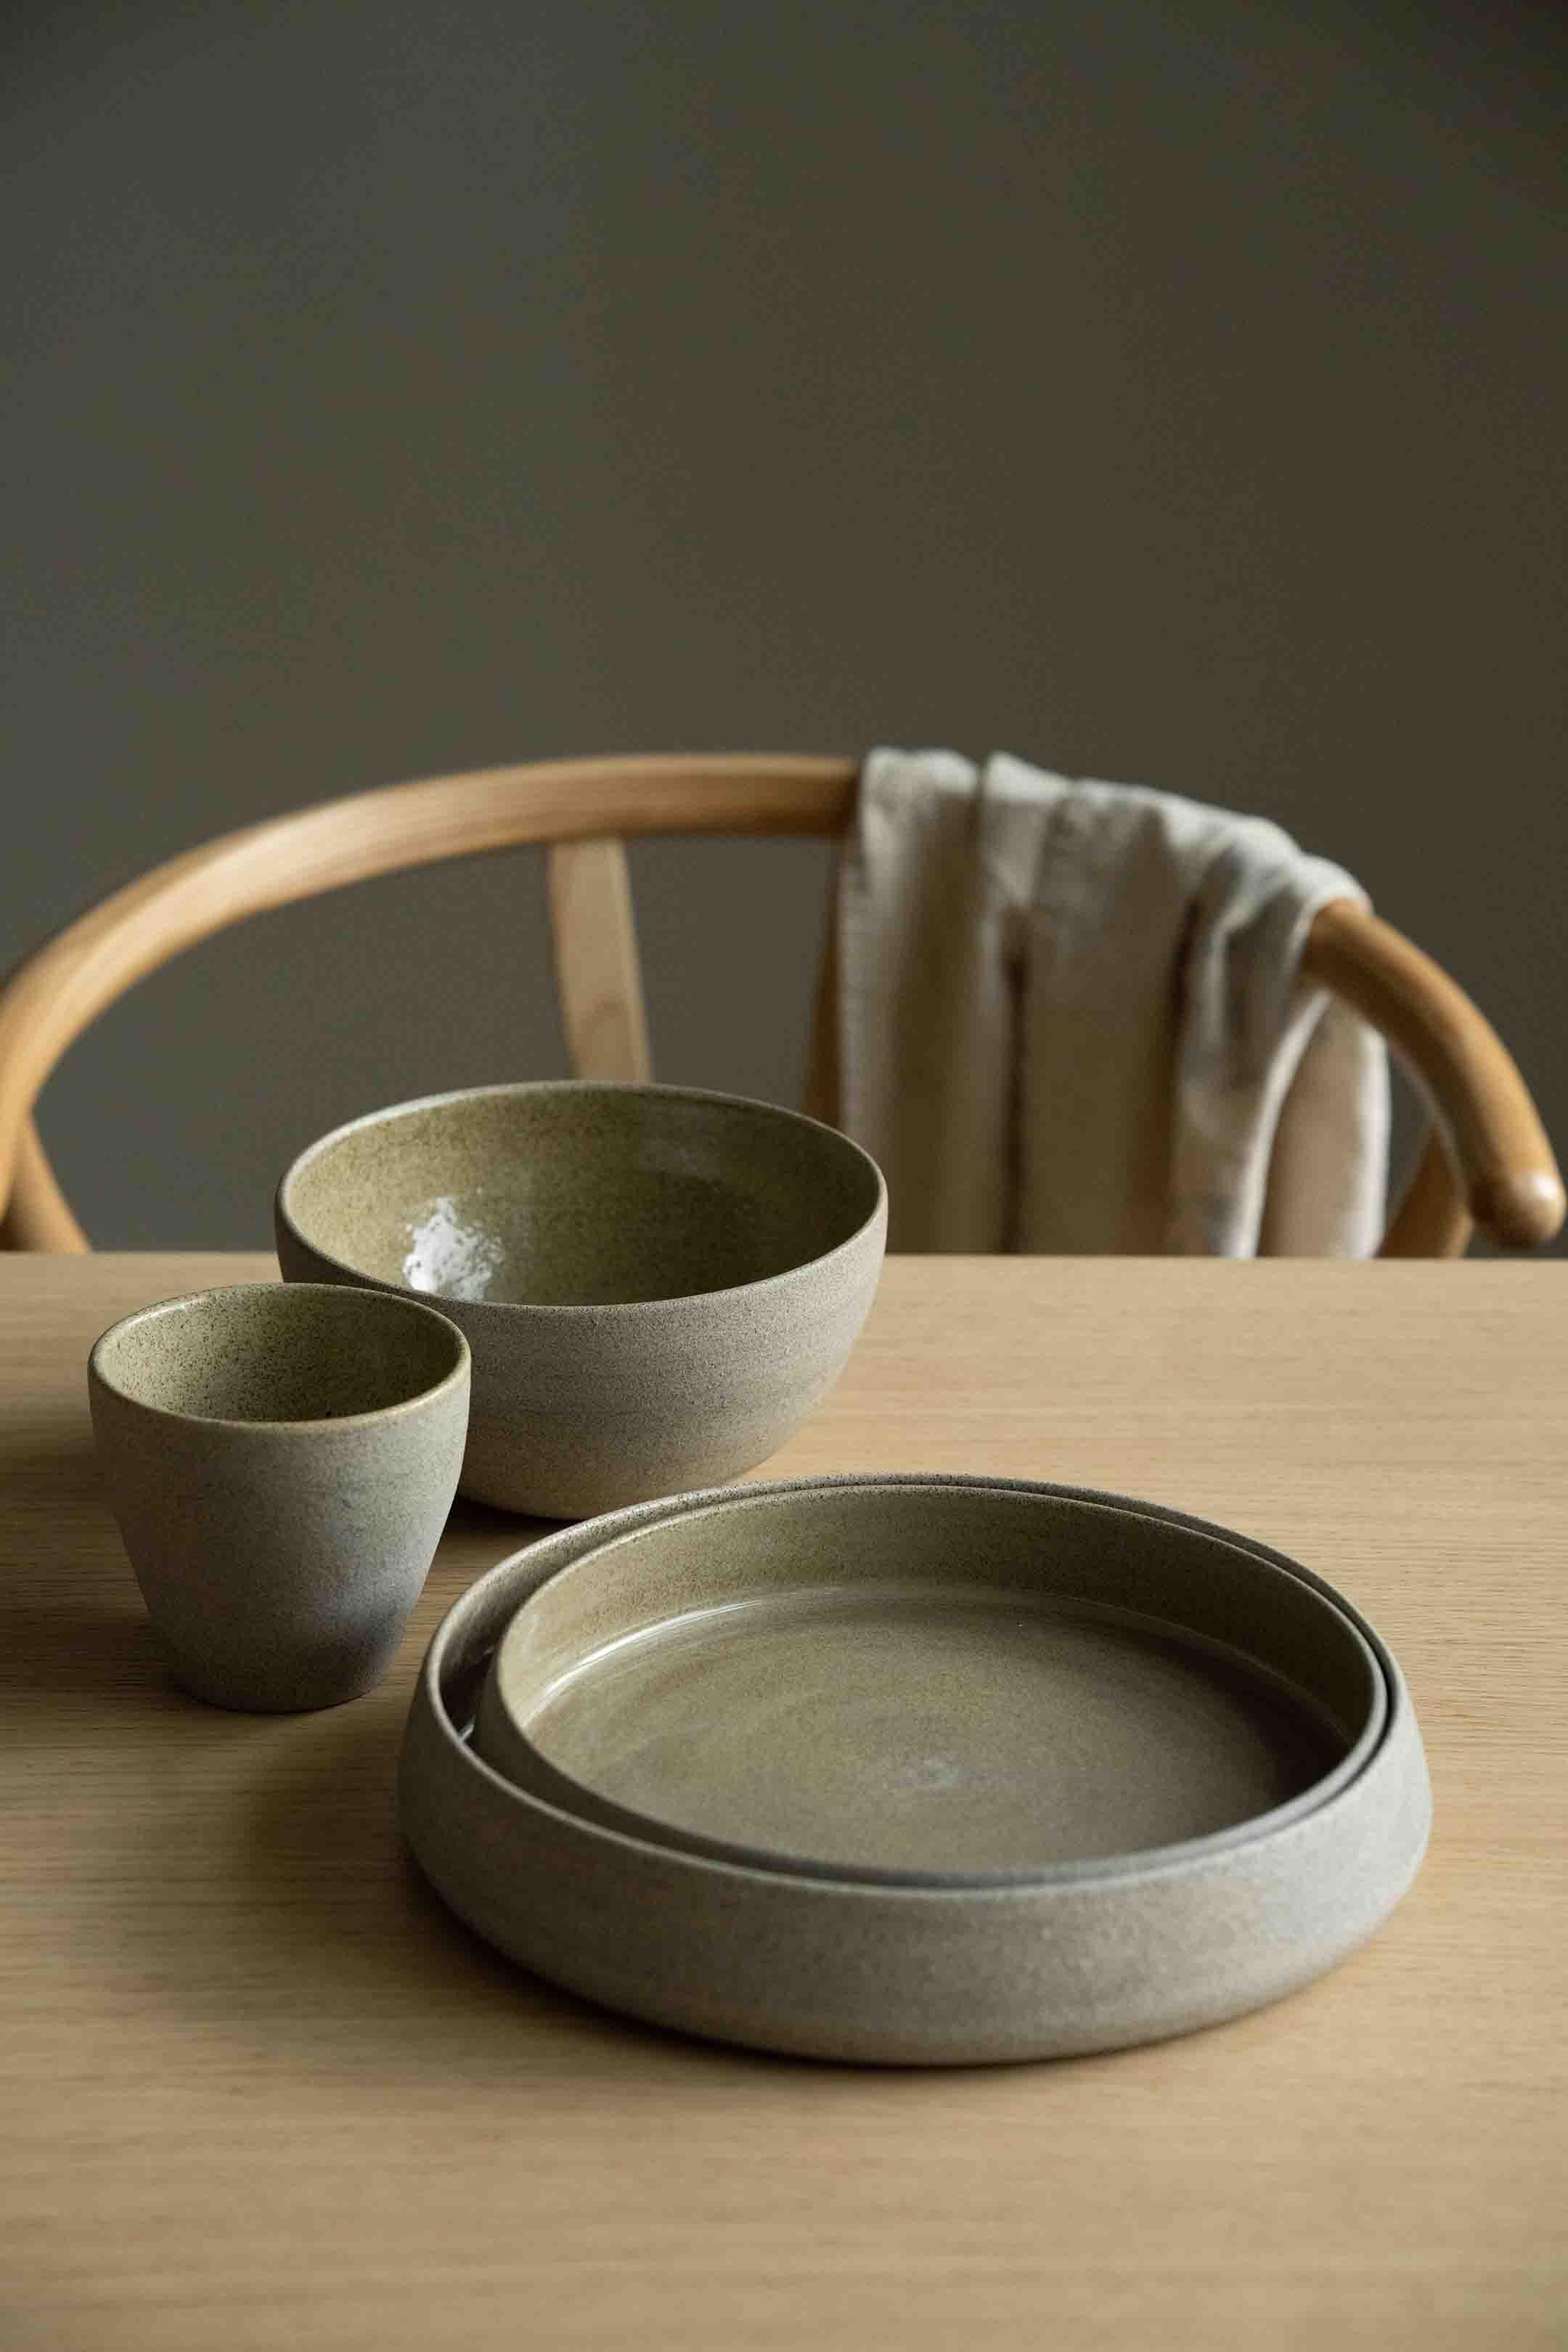 This stoneware dinner set is unlike any other dinnerware you had before. It doesn't look like ceramics, more like stone or concrete - this is why we decided to call this collection 